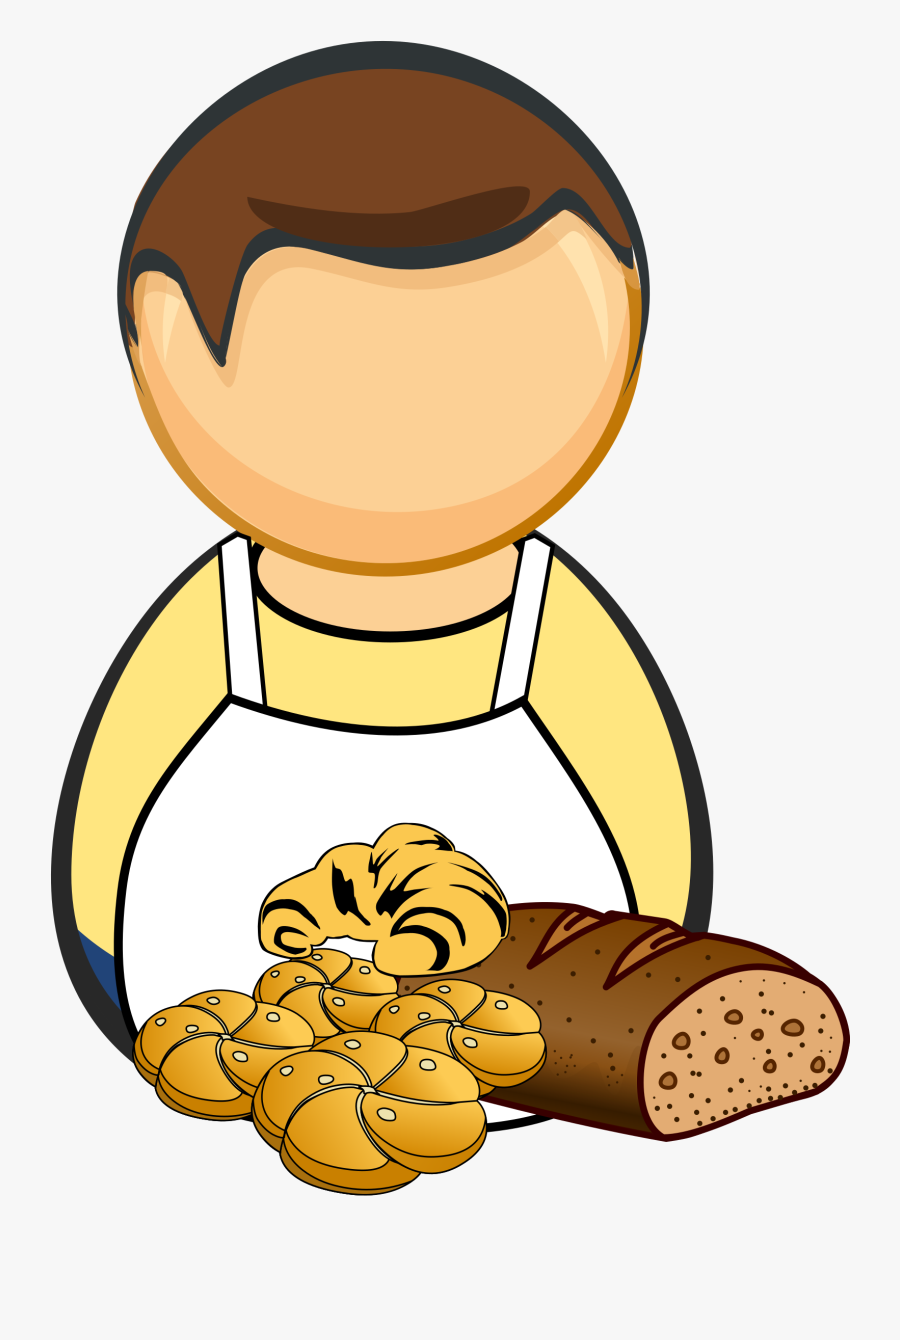 Clipart Baker - Bread And Pastry Clip Art, Transparent Clipart